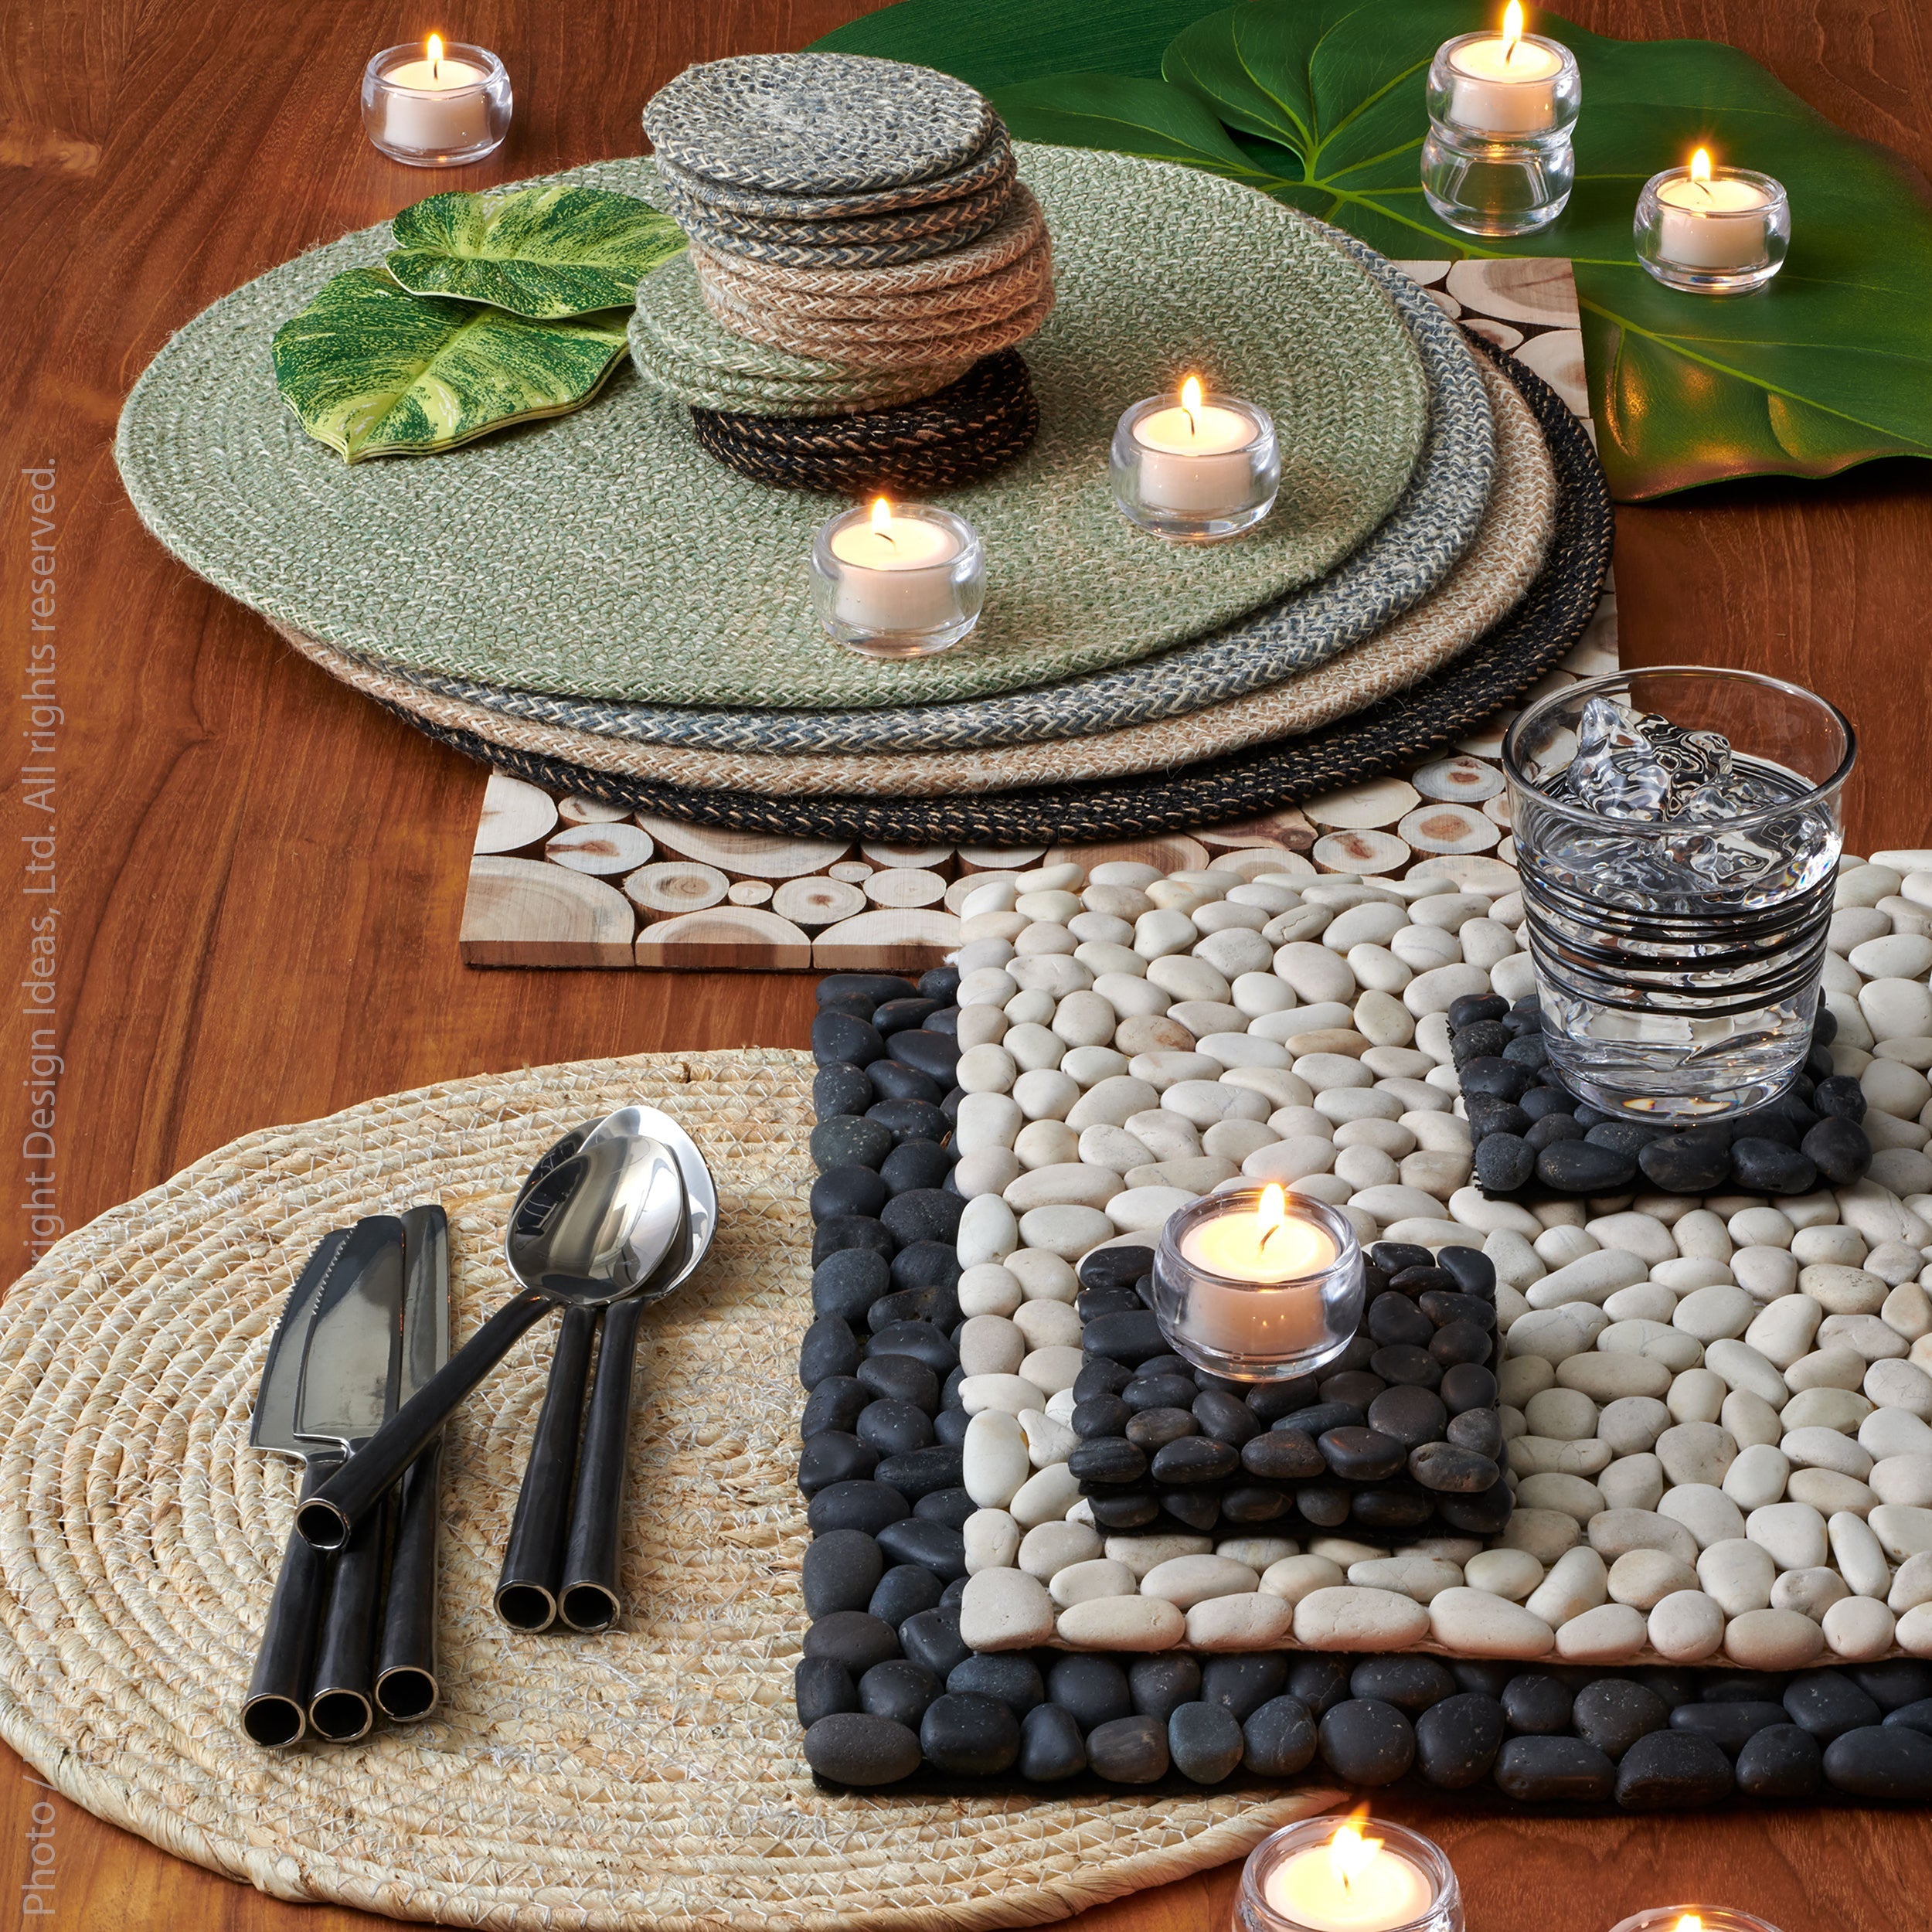 BaliHai Pathos Coaster Black Color | Image 2 | From the BaliHai Collection | Skillfully assembled with natural eva foam for long lasting use | texxture home